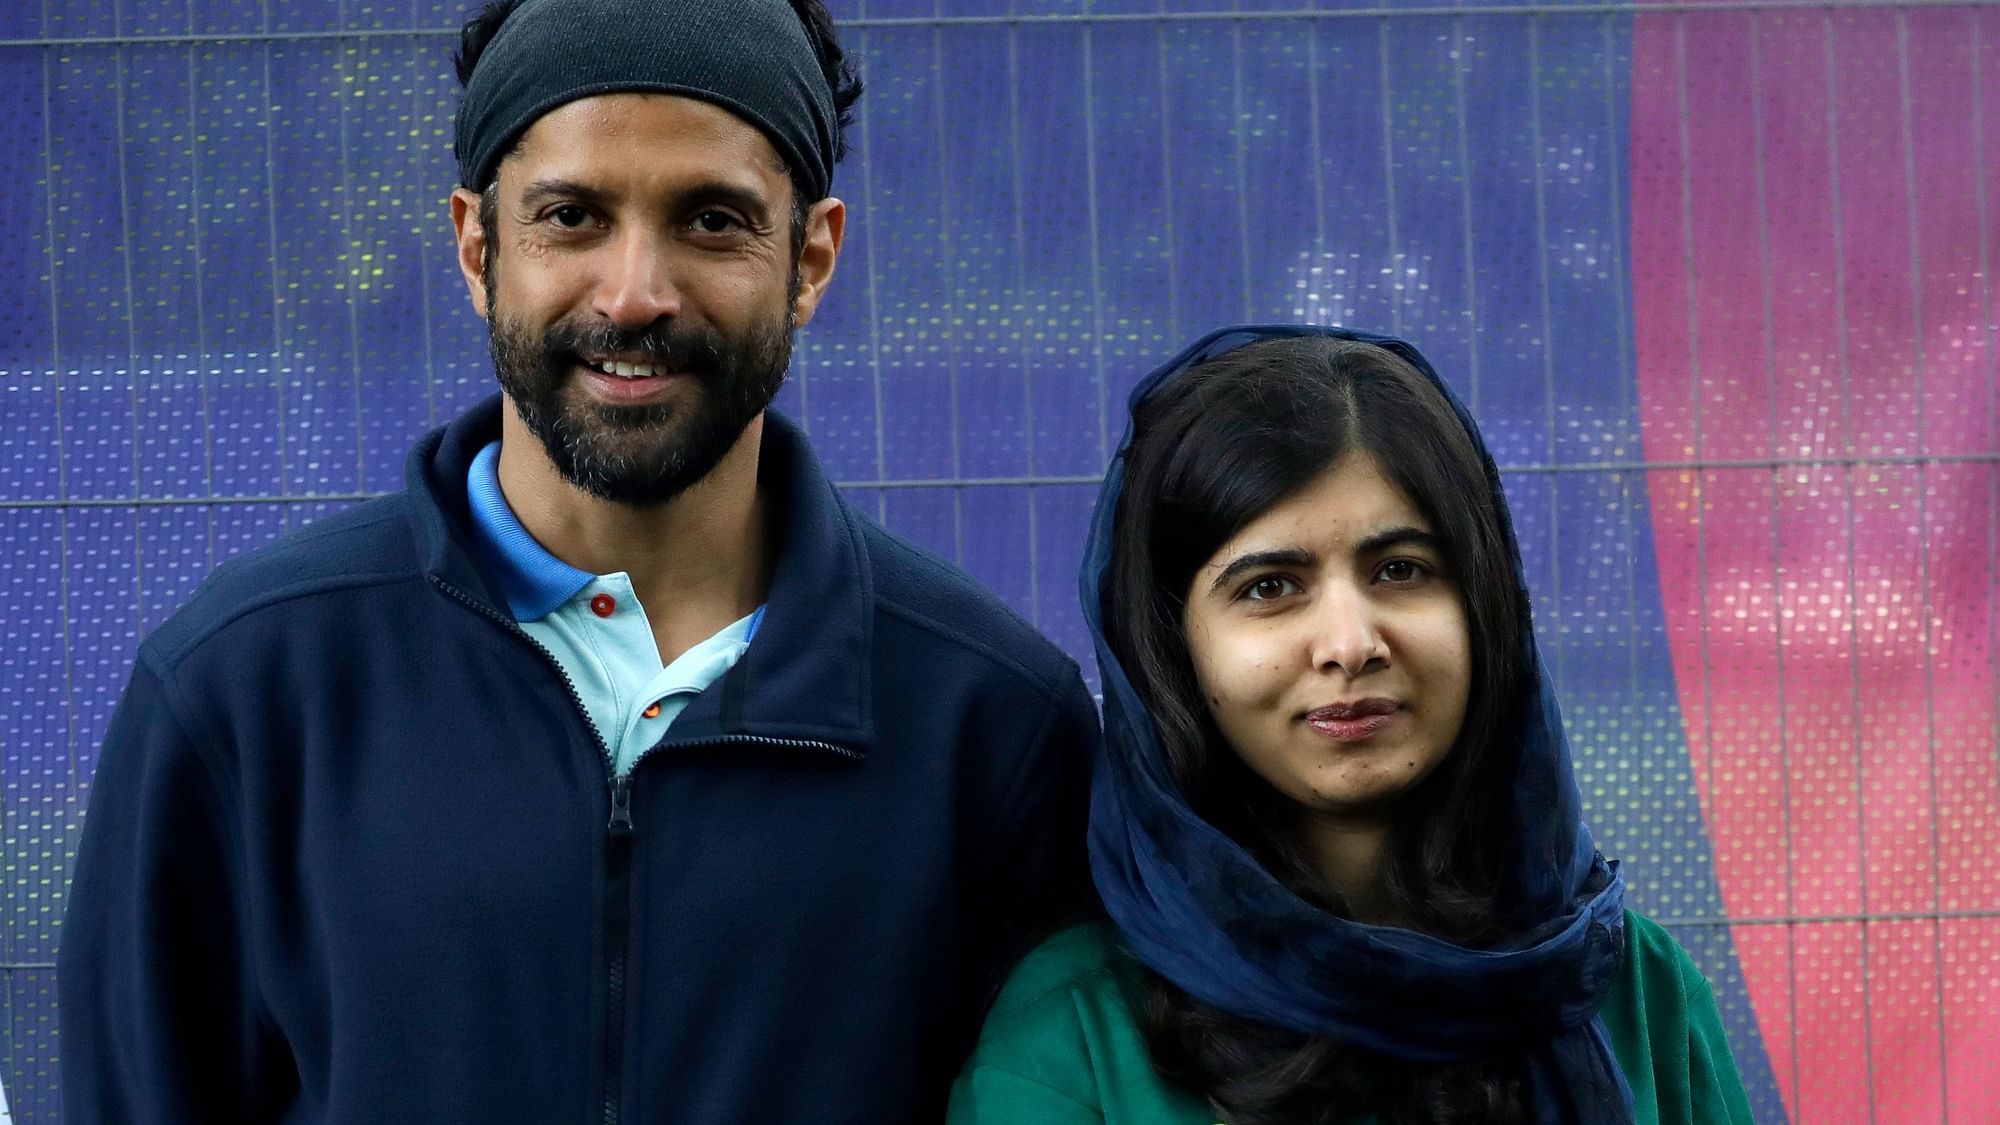 Malala Yousufzai and Farhan Akhtar at opening ceremony of 2019 ICC World Cup.